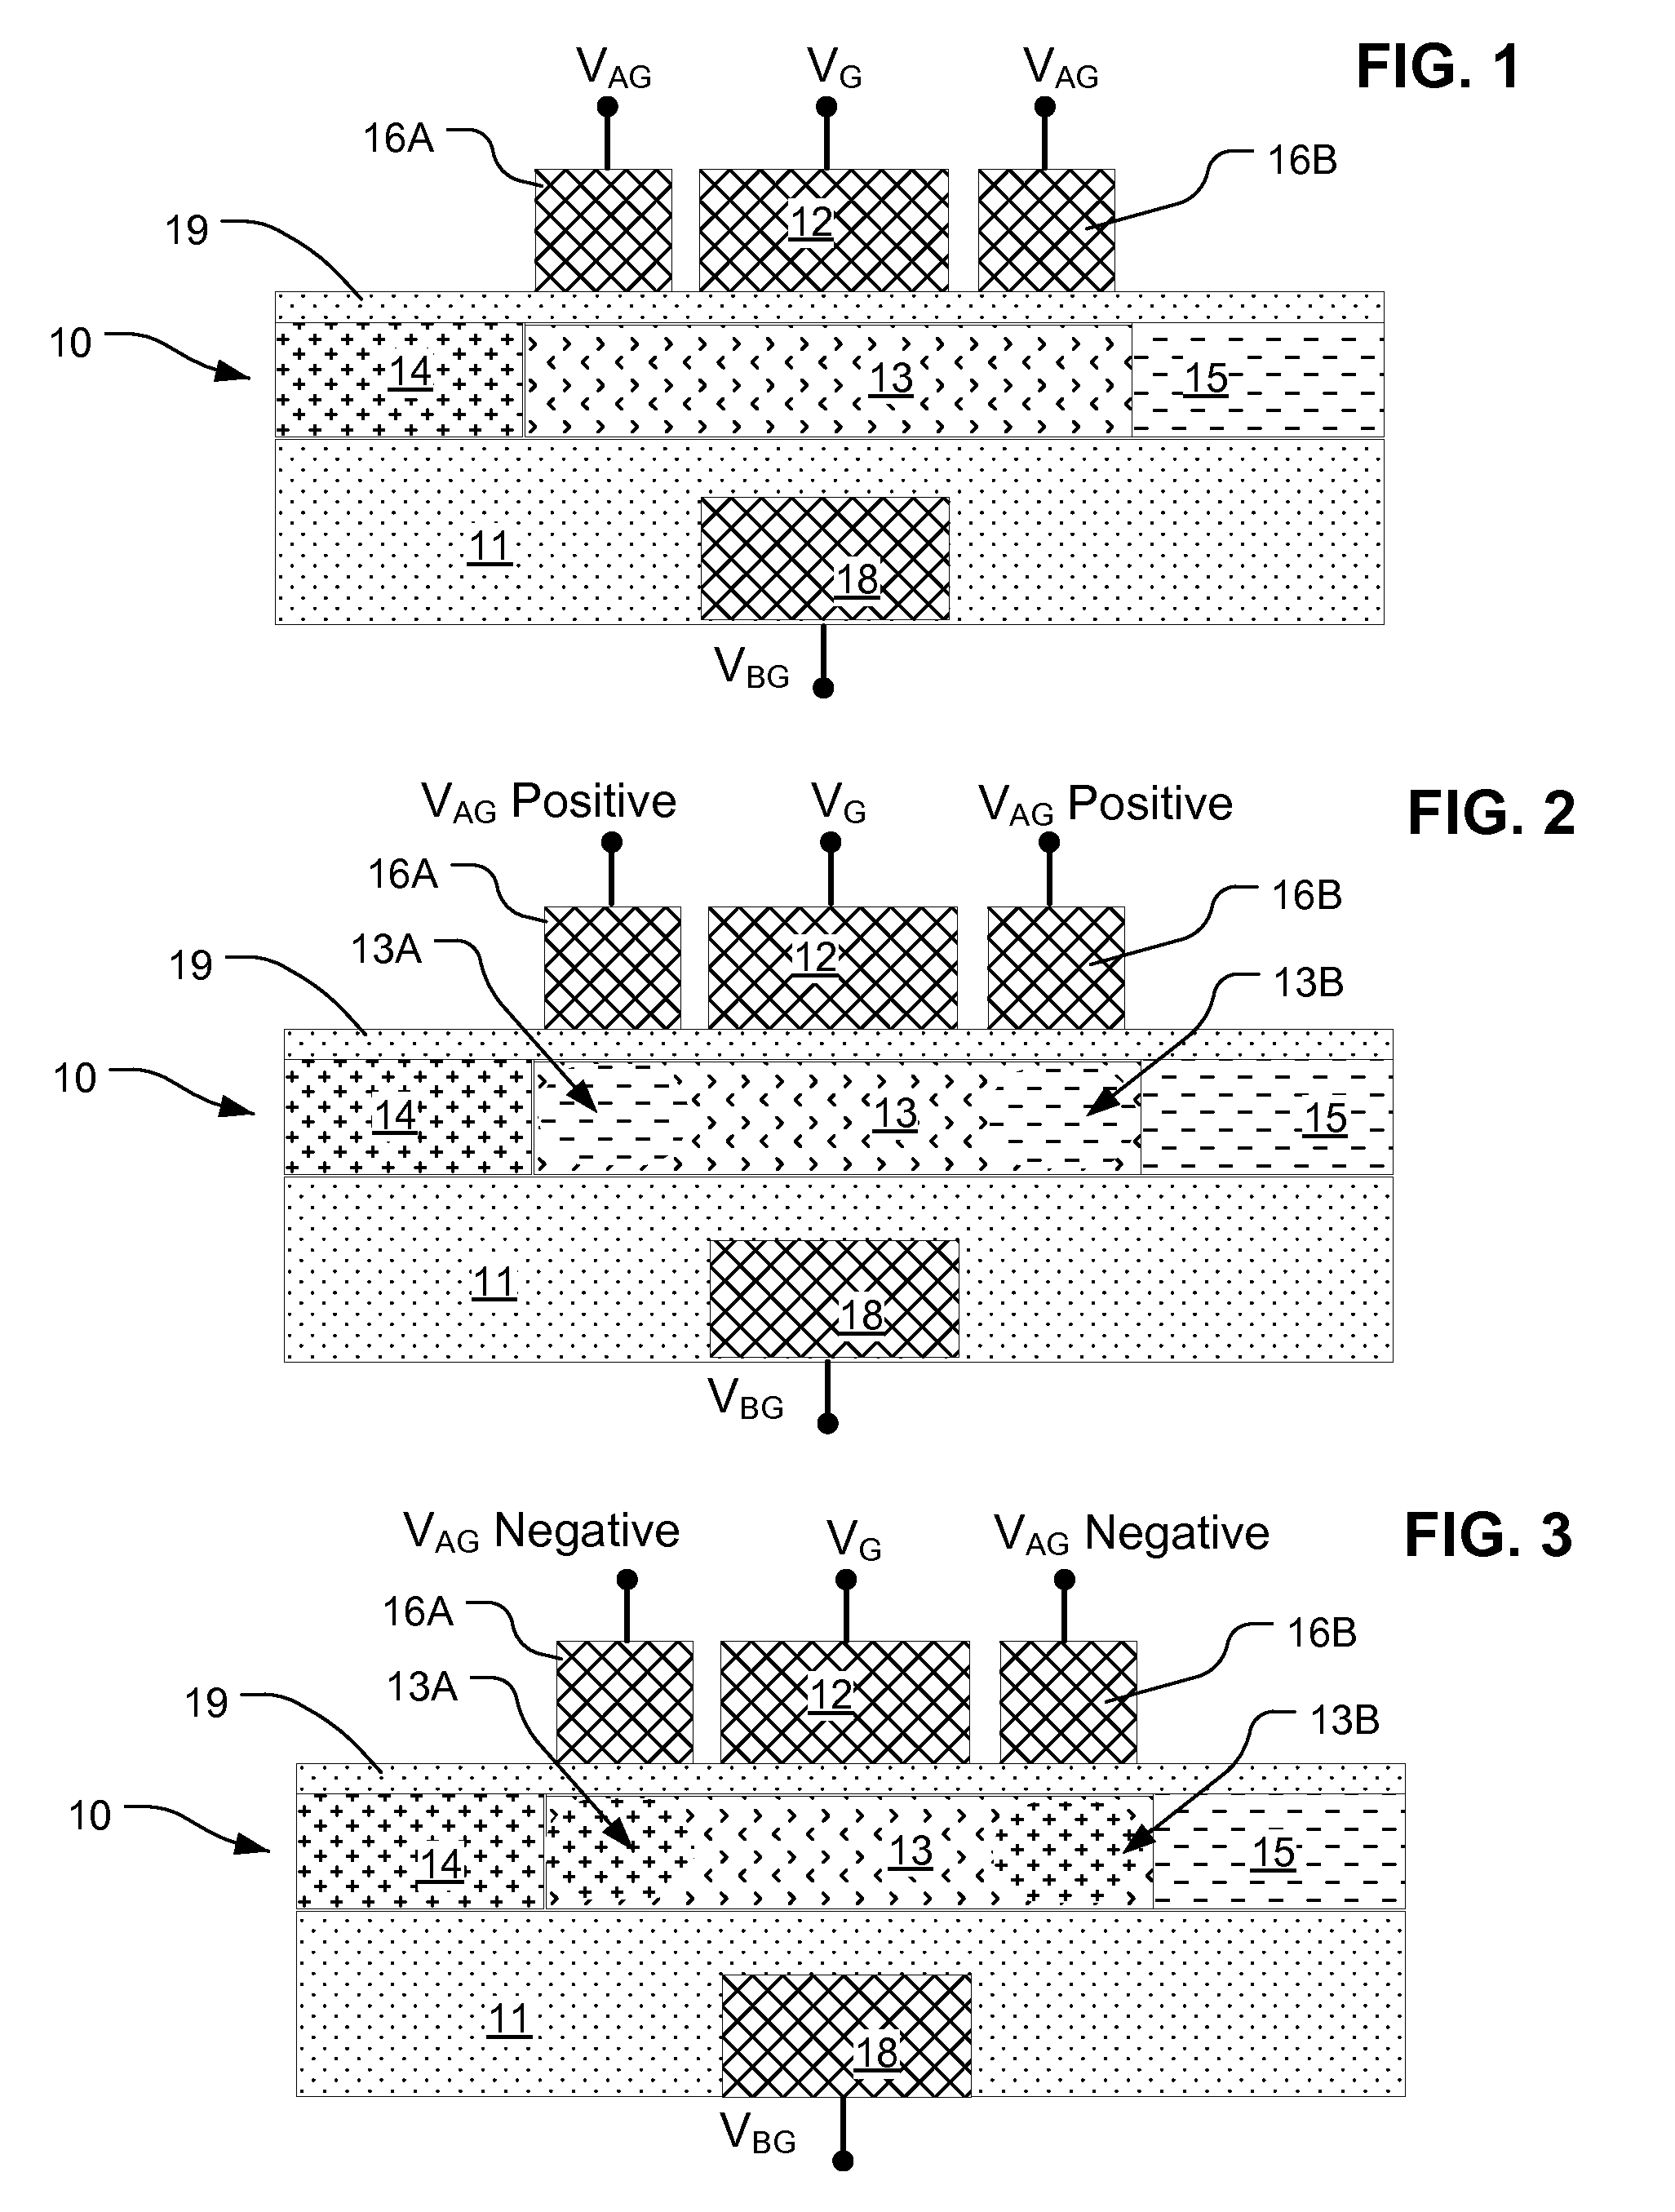 Dual-mode memory devices and methods for operating same